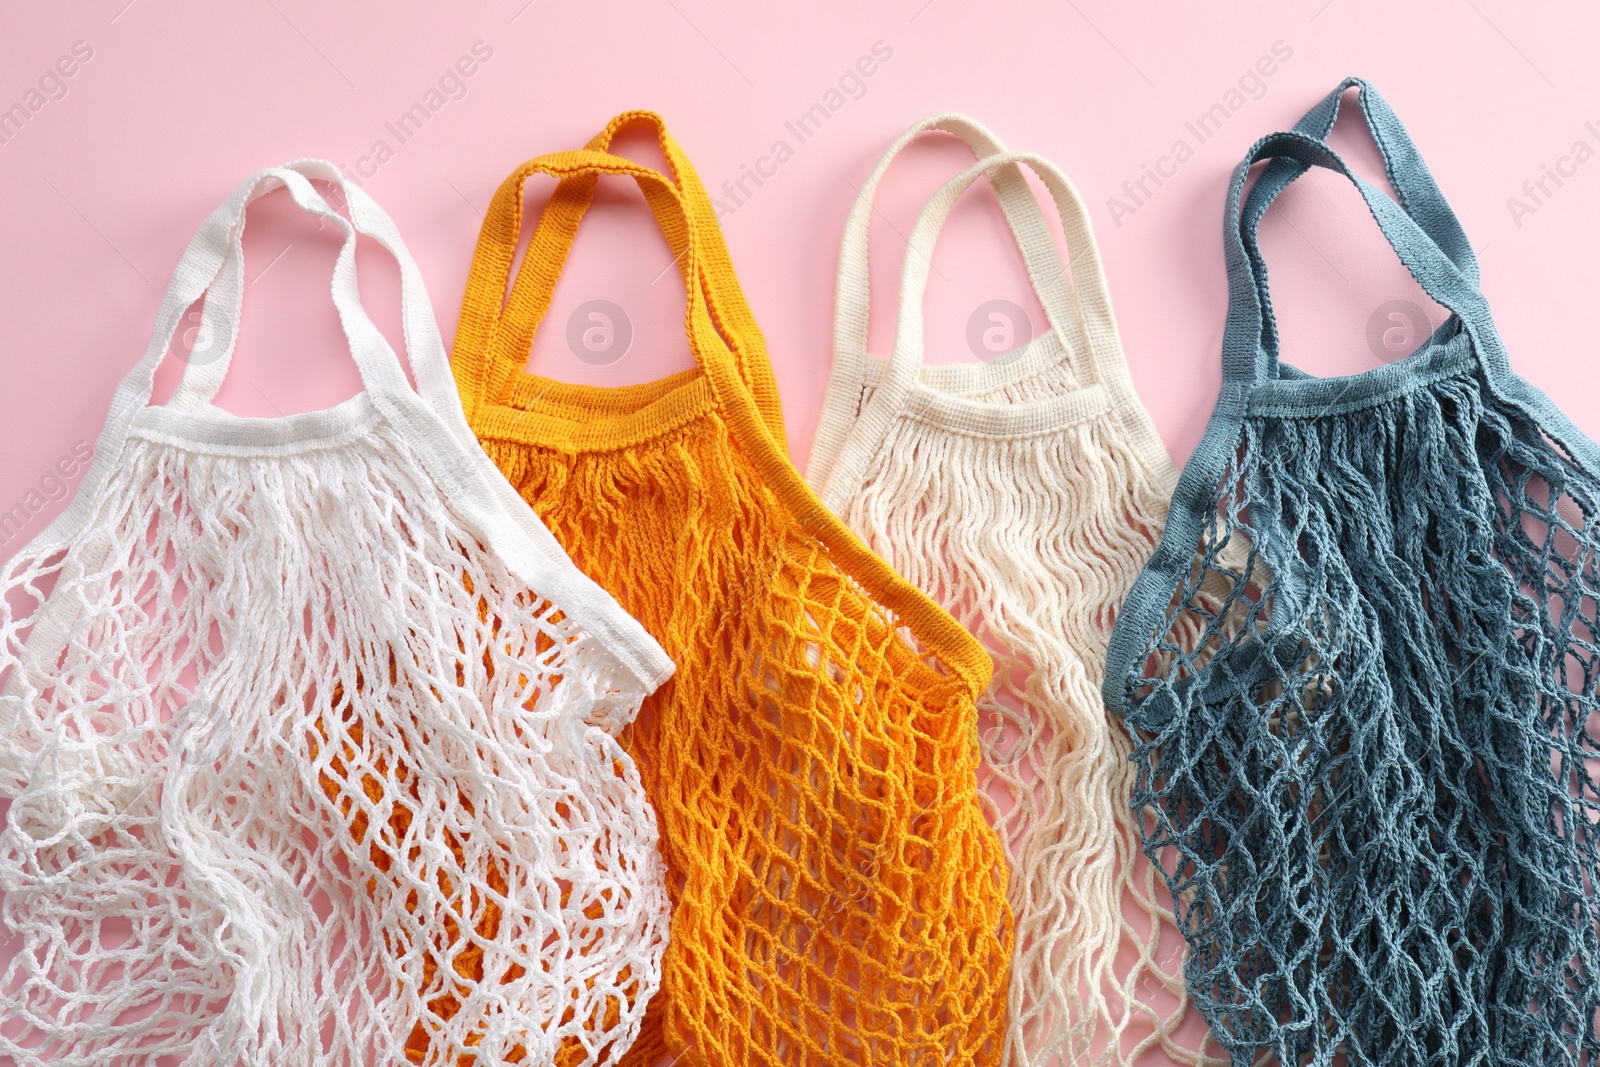 Photo of Different string bags on pink background, top view